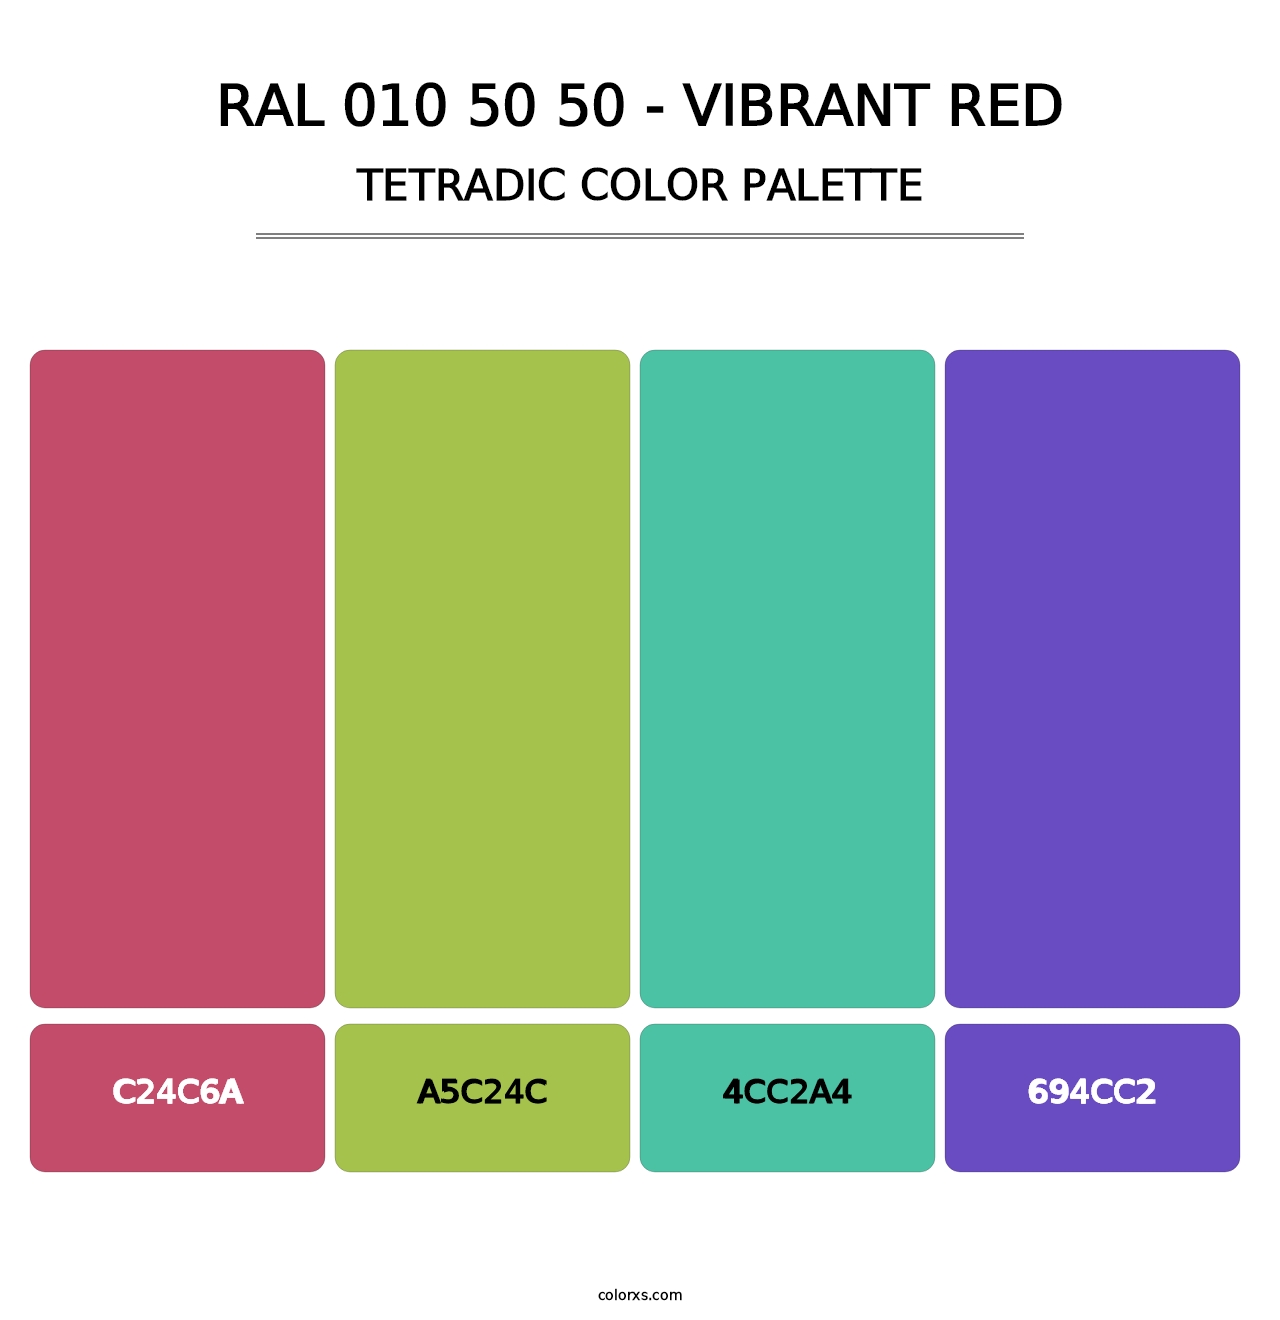 RAL 010 50 50 - Vibrant Red - Tetradic Color Palette